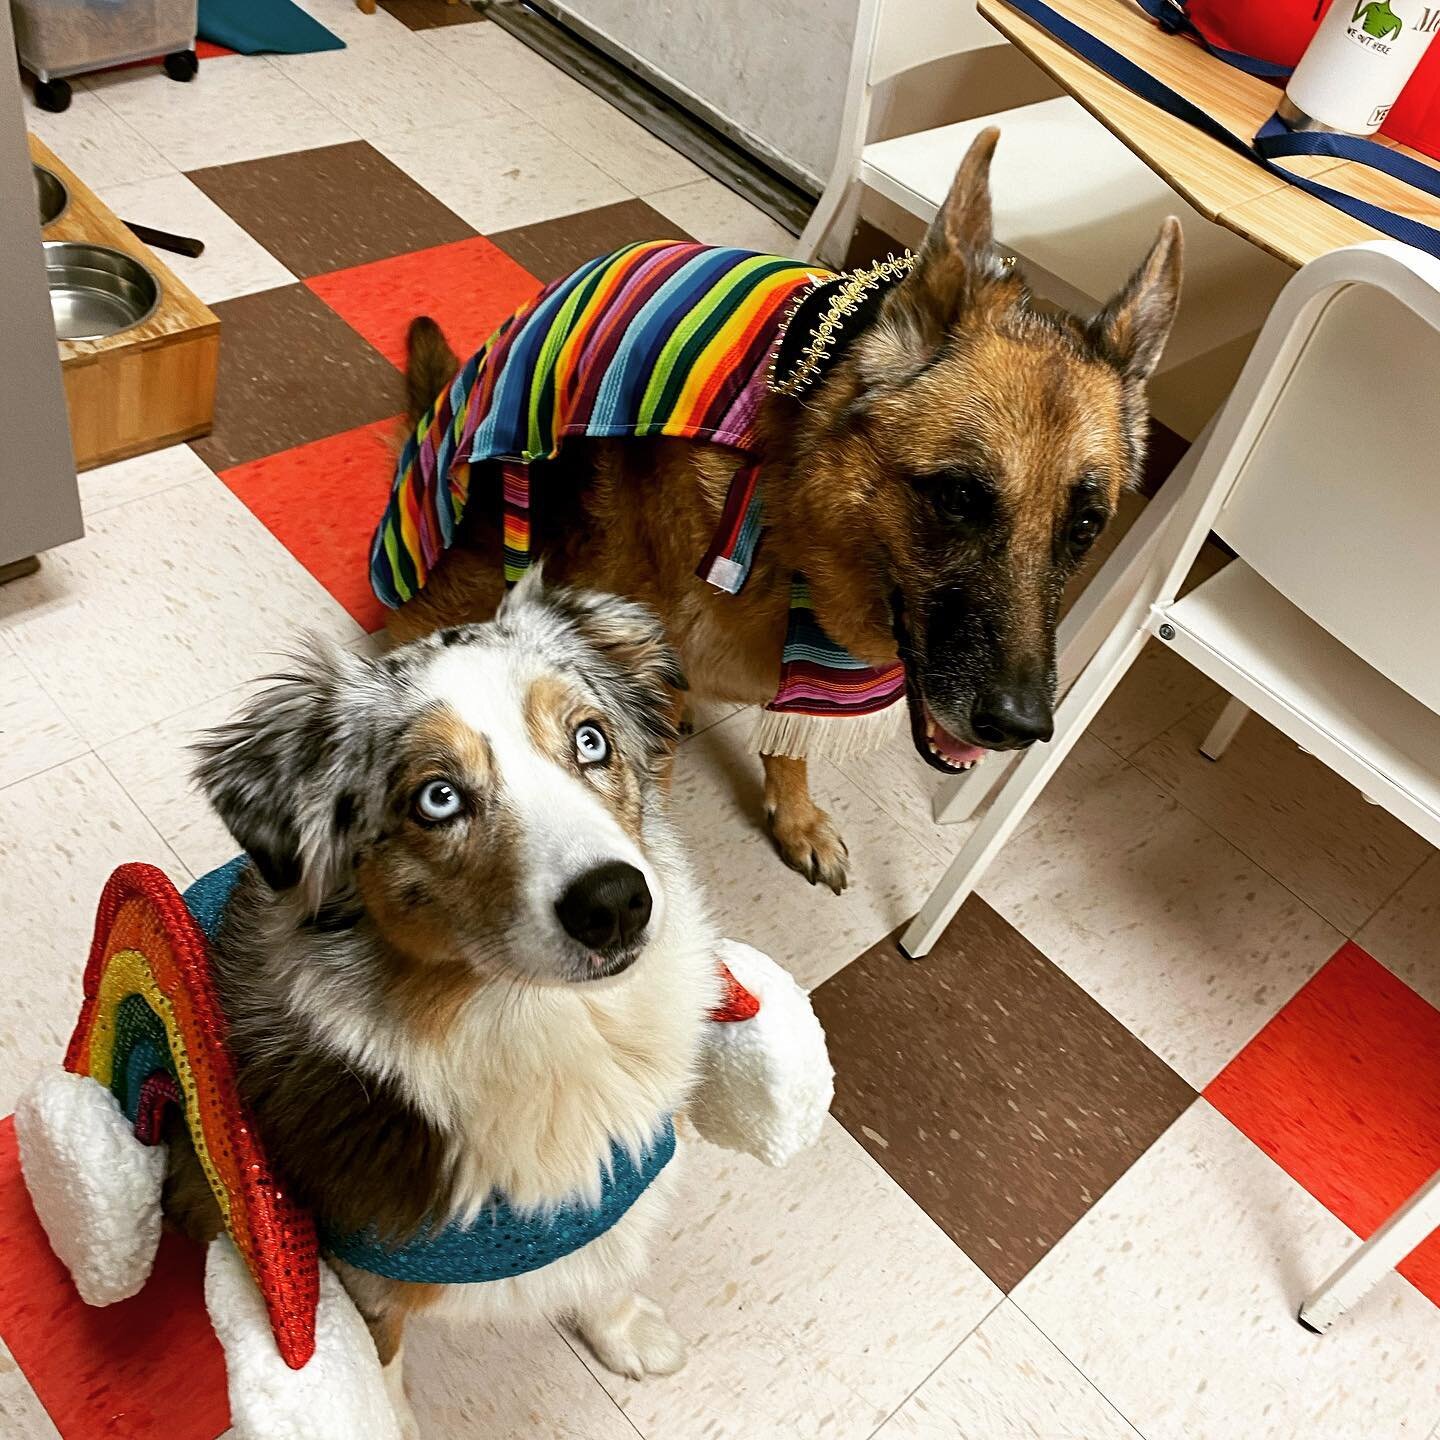 HAPPY BIRTHDAY TO MERCHE (5/5)AND DAISY (4/25) and HAPPY CINCO DE MAYO! What a beautiful day it is! ☀️🇮🇹🥳